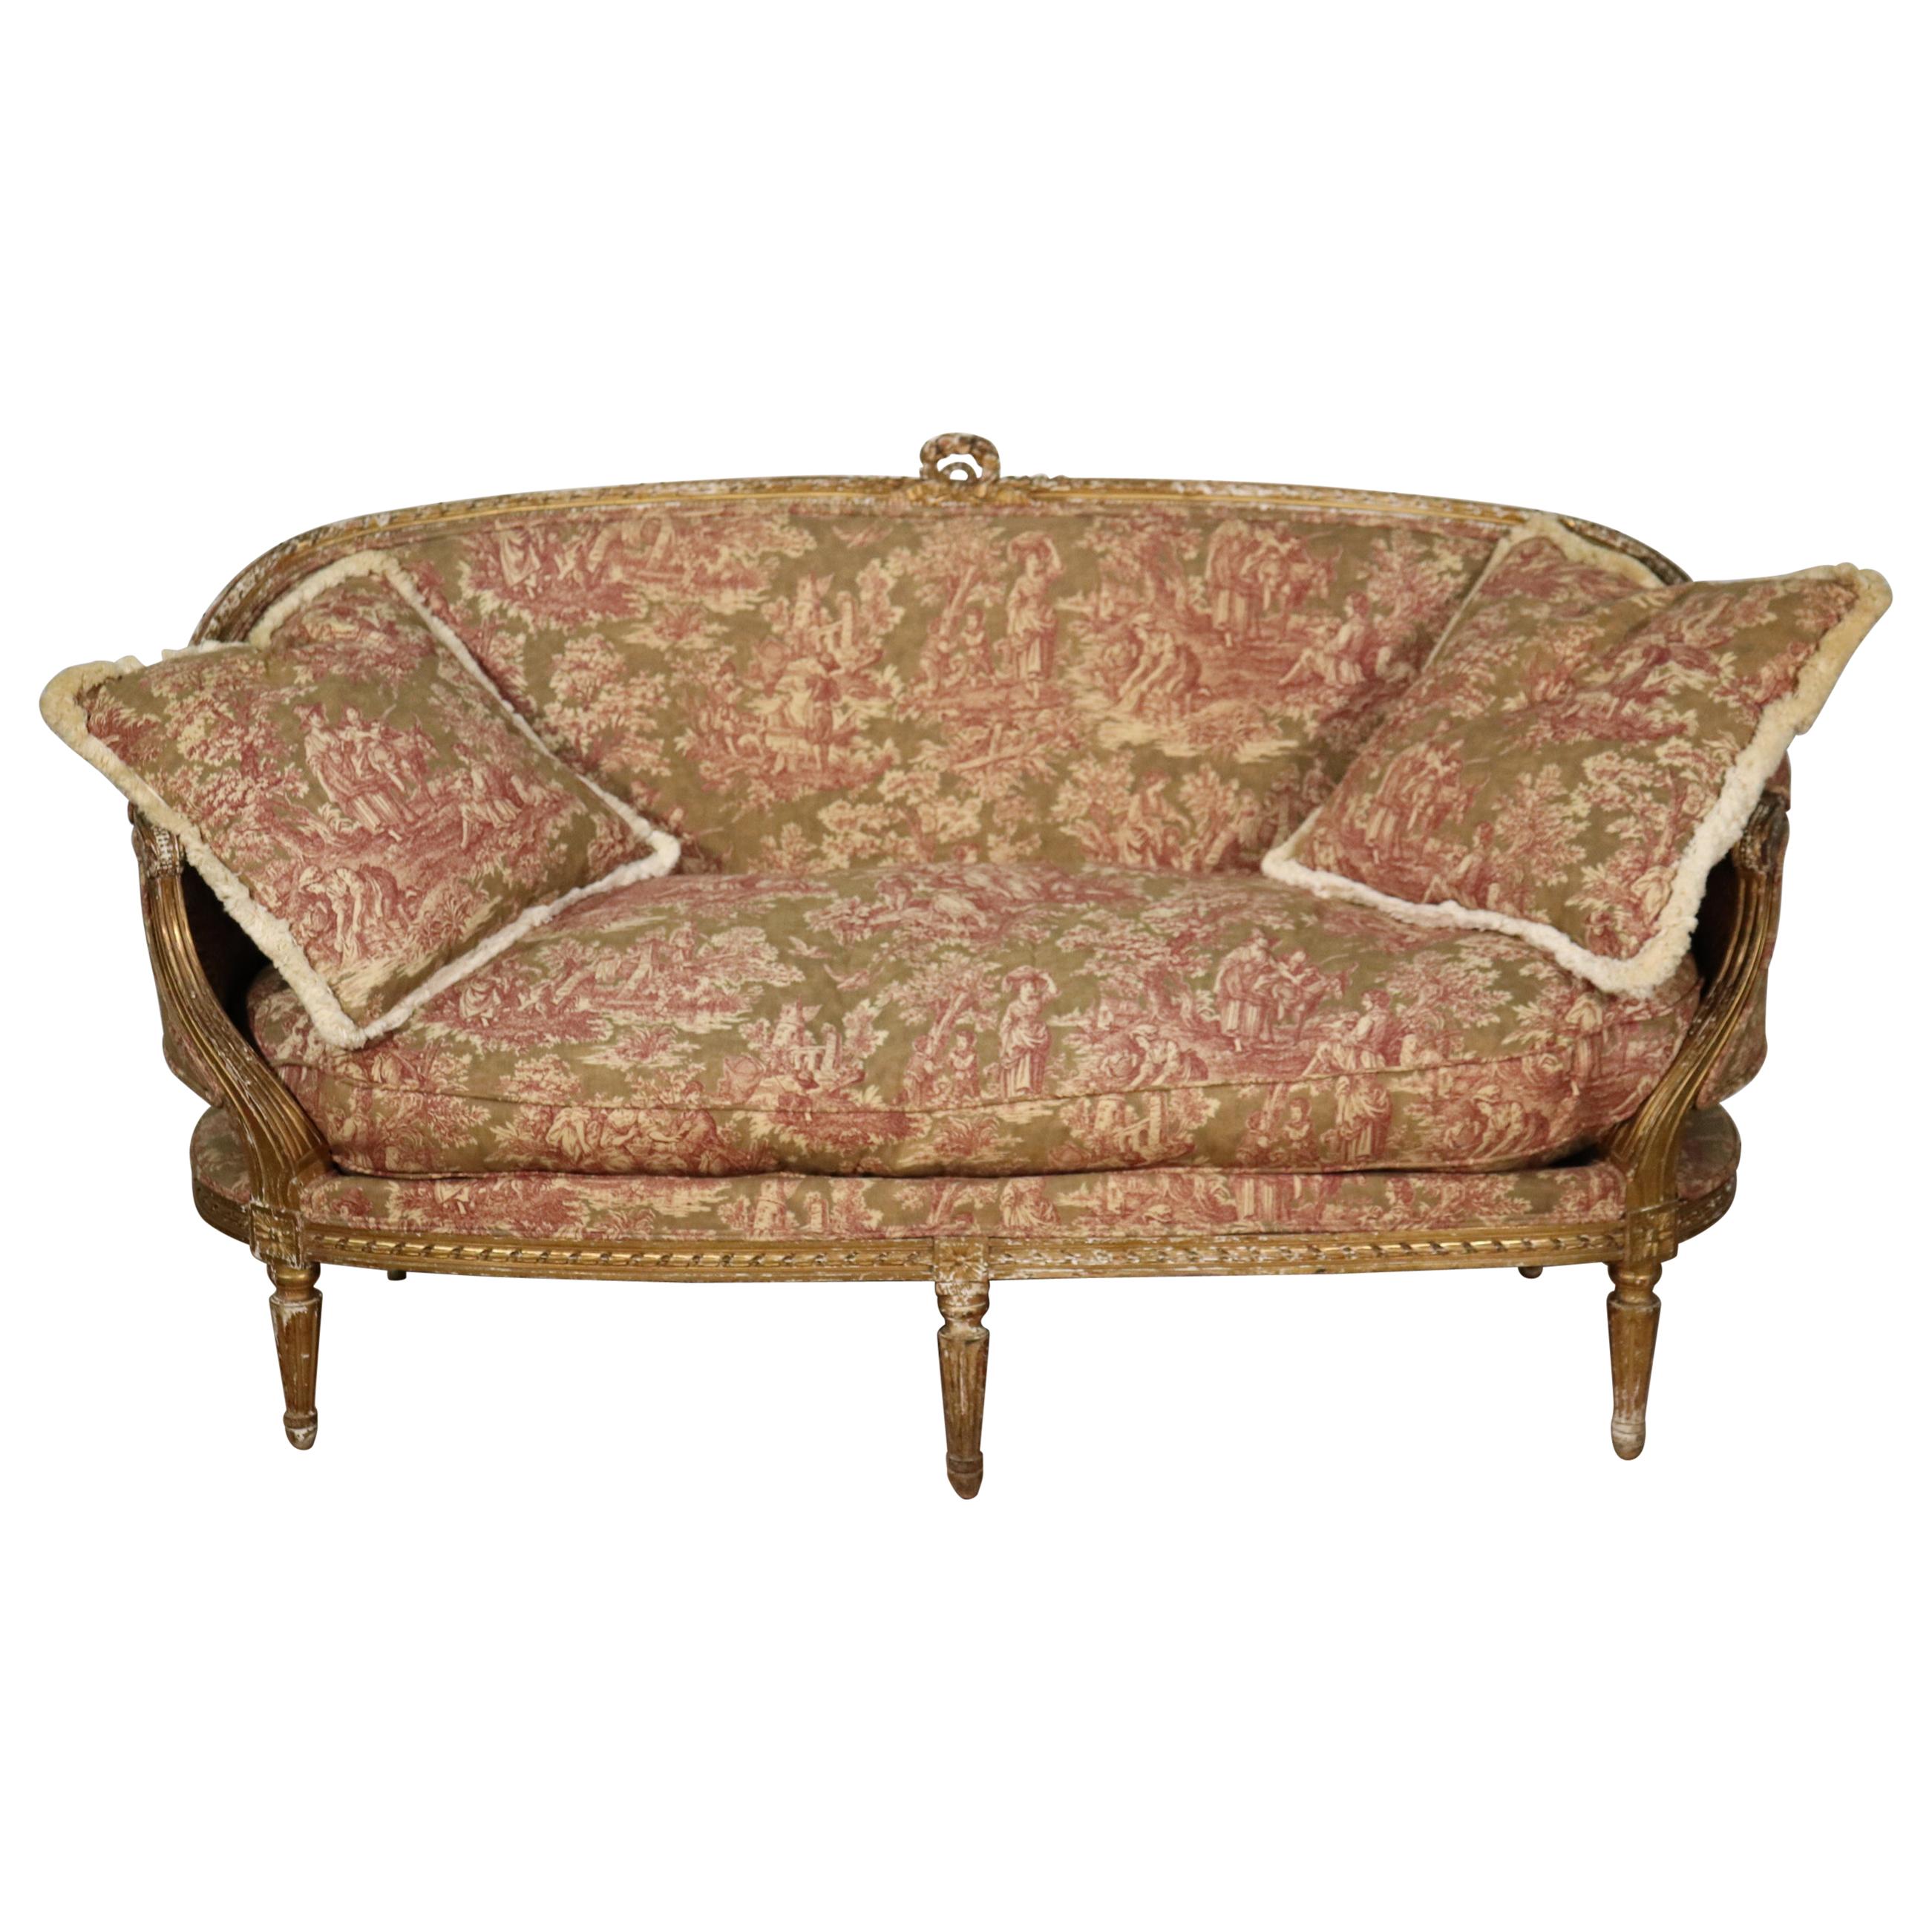 French Louis XVI Gilded Settee Canape, Circa 1890